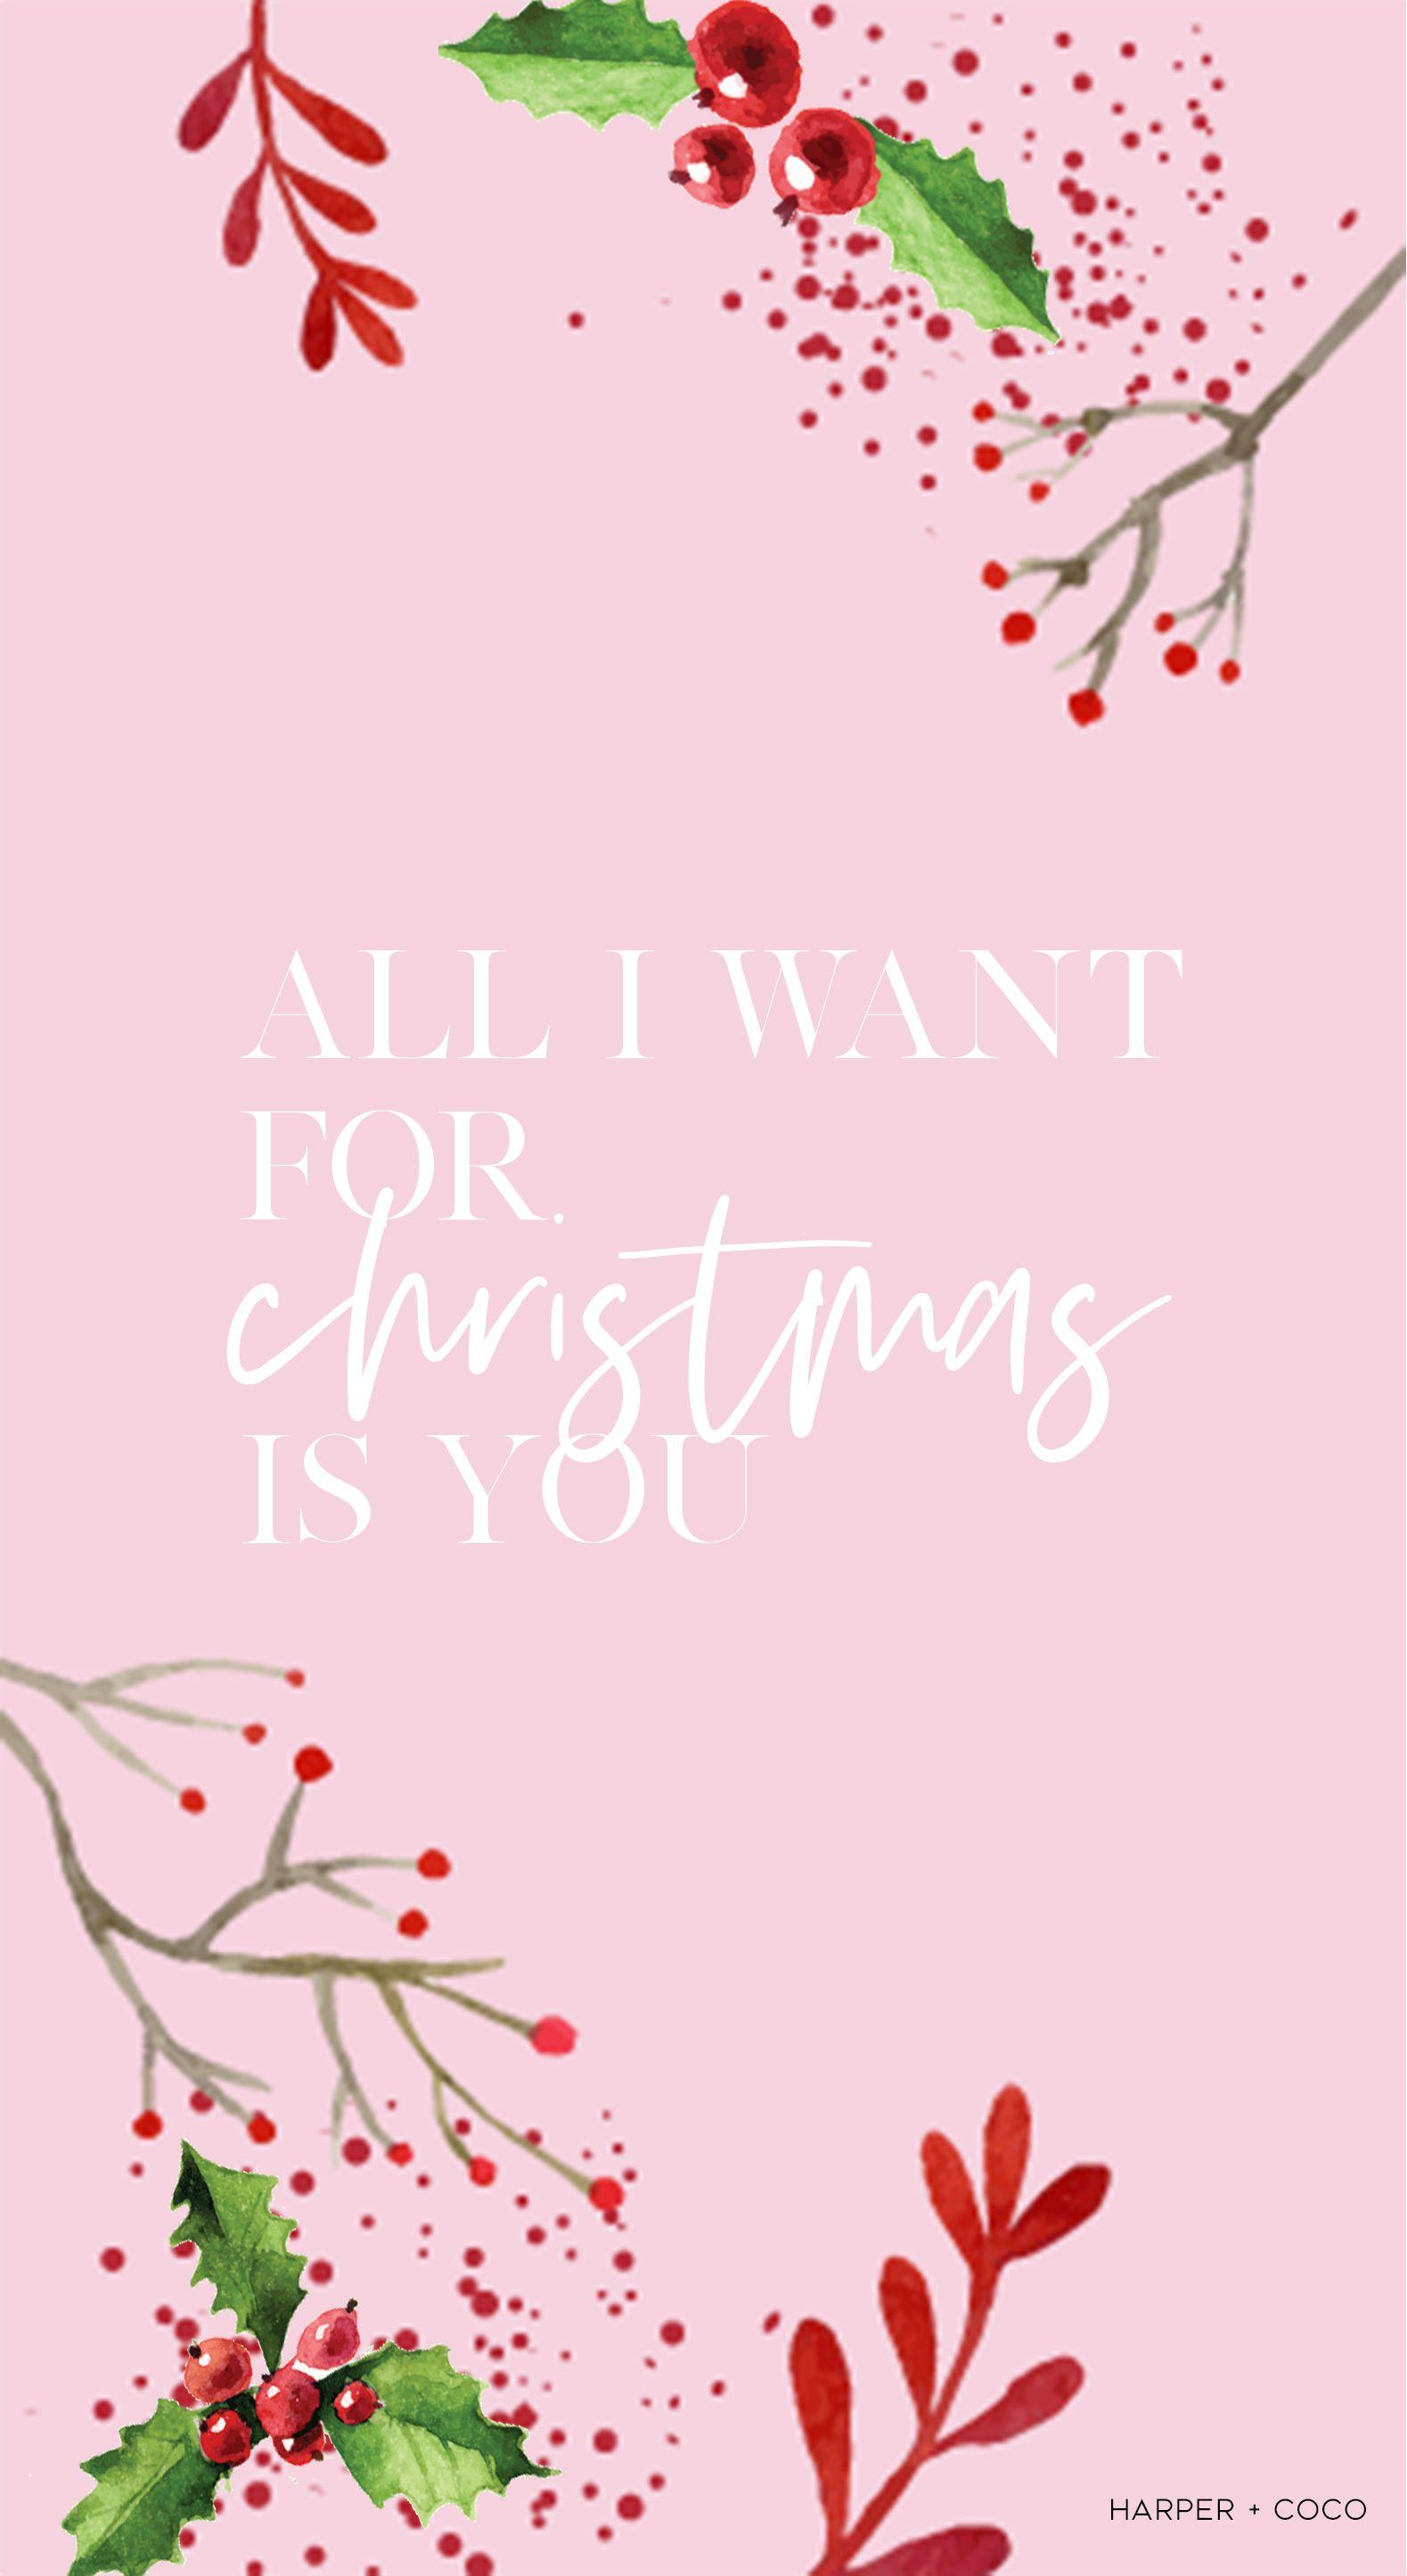 All I want for Christmas is you iPhone wallpaper. Pink Christmas #freewallpaper #ip. Wallpaper iphone christmas, Christmas phone wallpaper, Christmas wallpaper